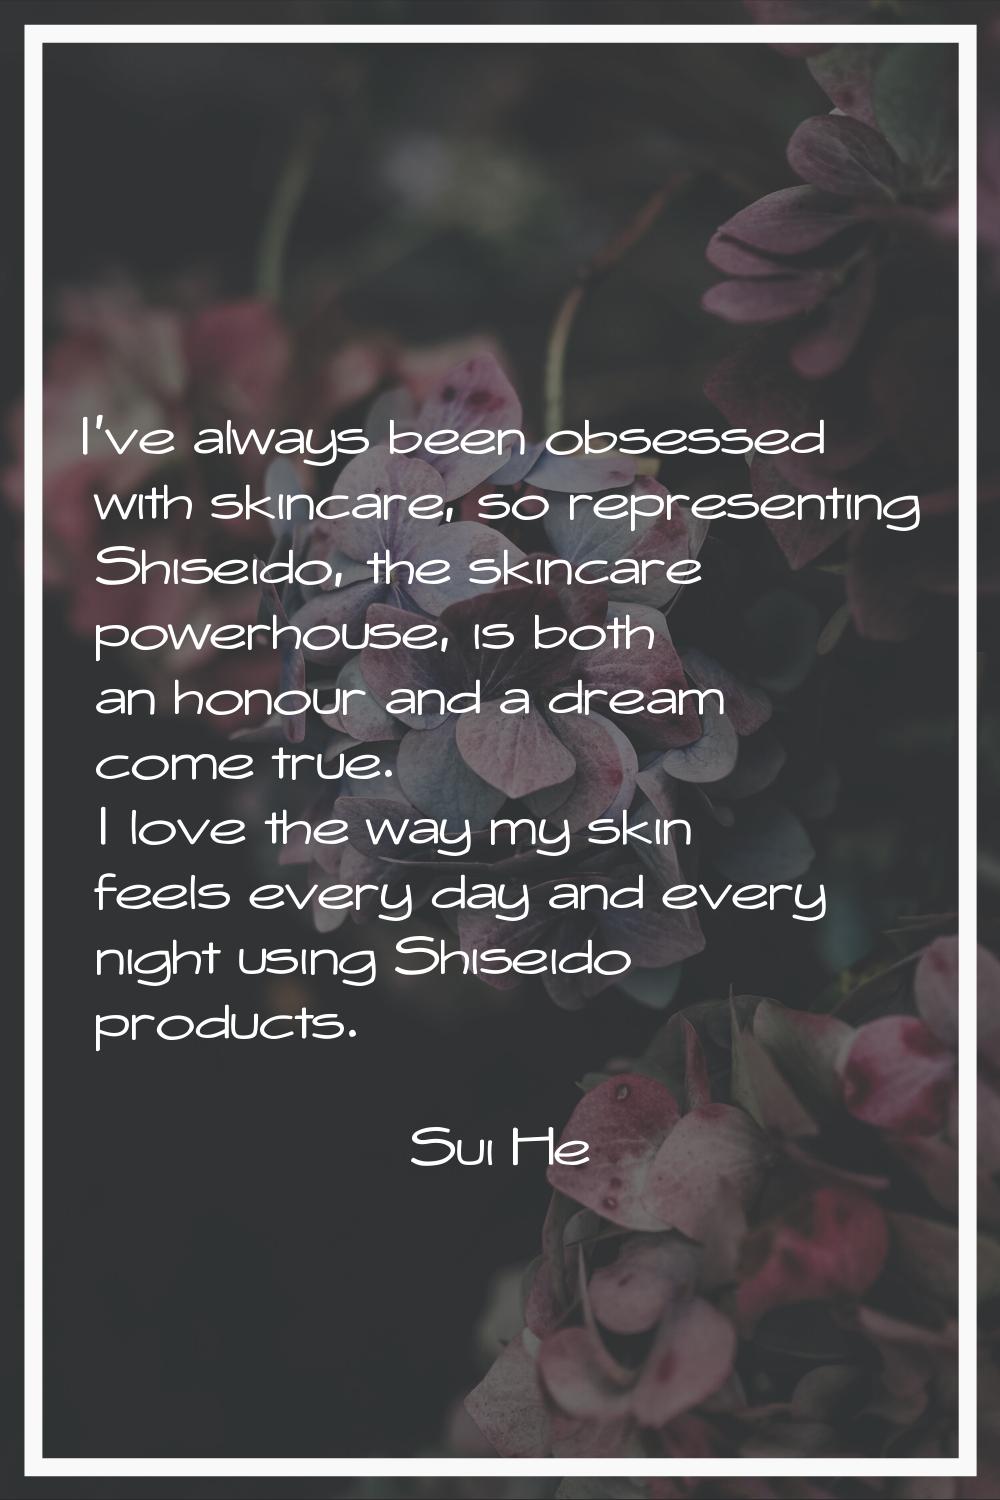 I've always been obsessed with skincare, so representing Shiseido, the skincare powerhouse, is both